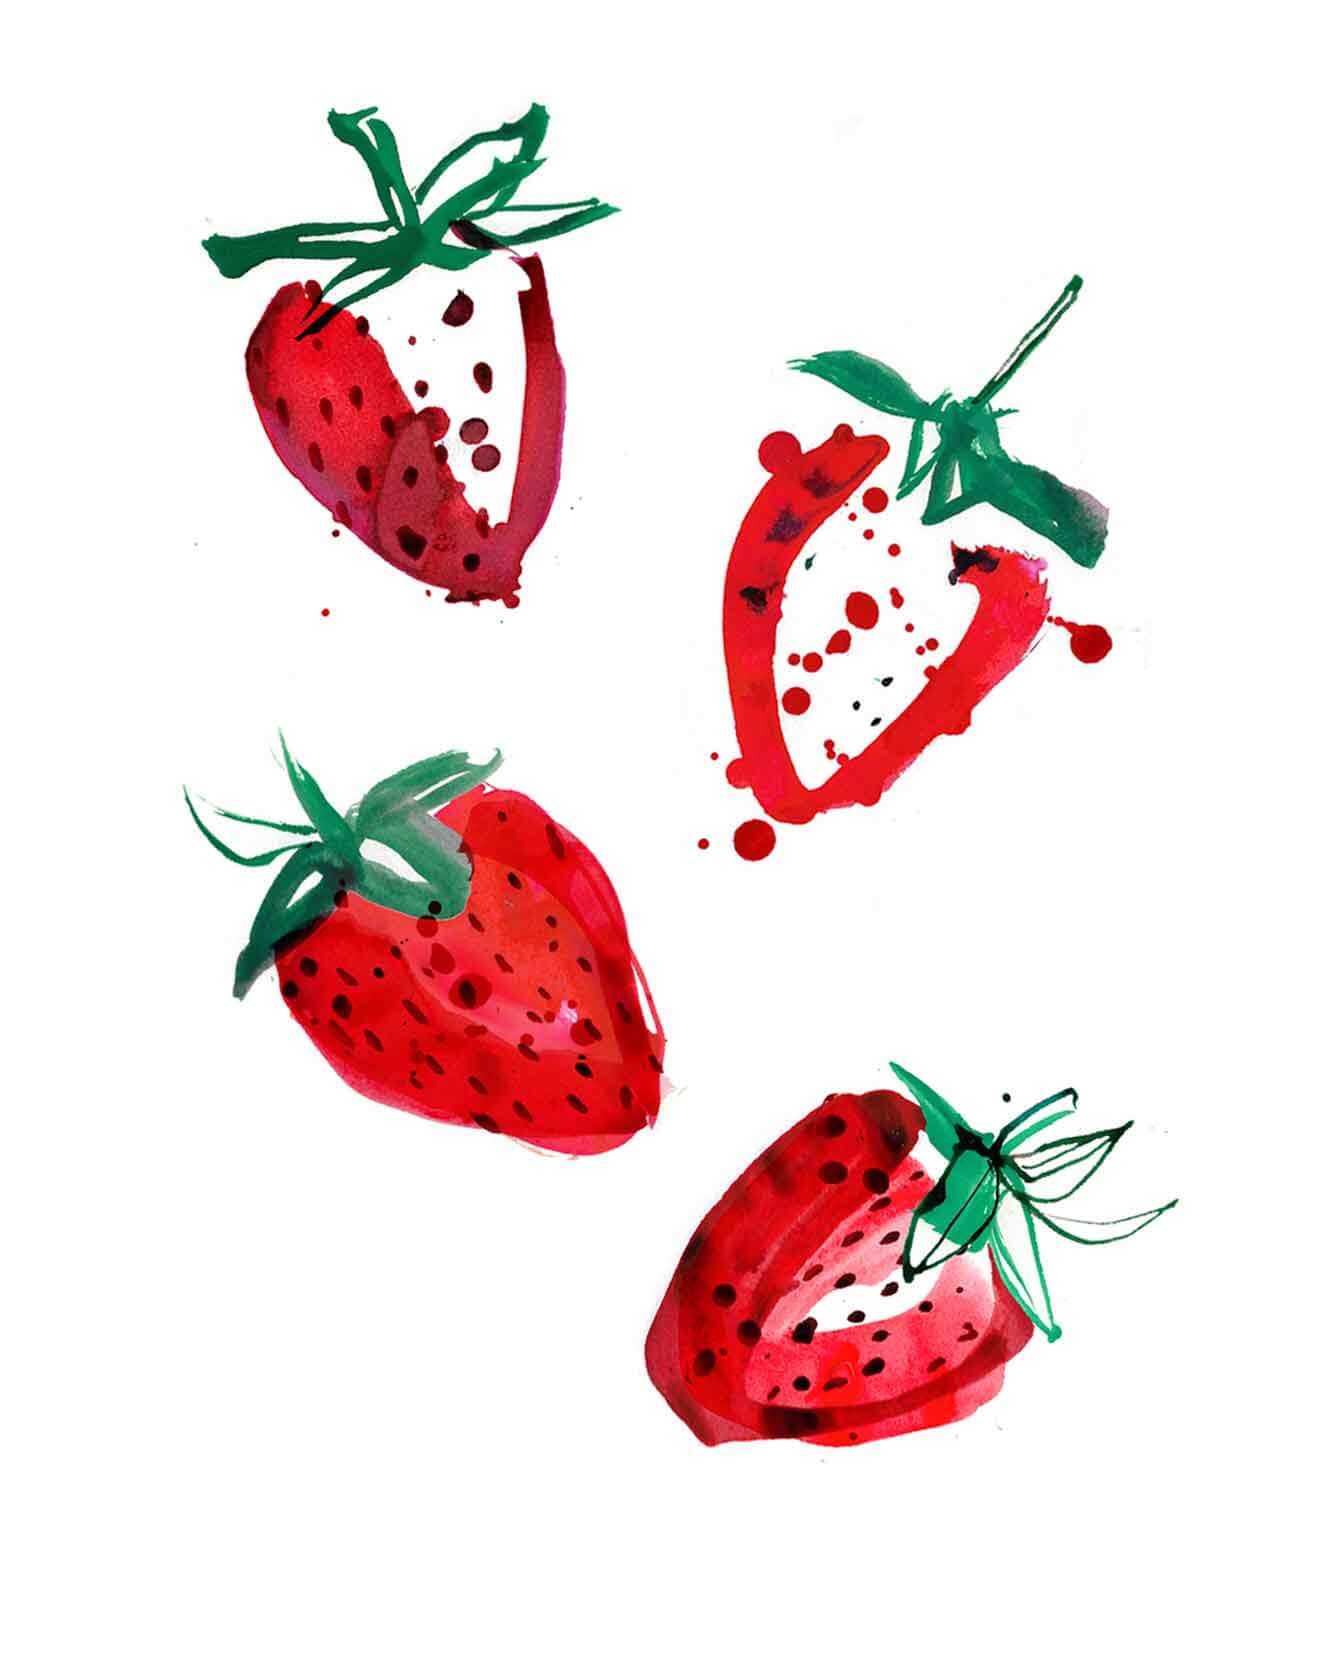 British Strwberries. A series of illustrations of fresh vegetable watercolour and ink drawings. Full colour Illustrations for a UK Food Map for Spring Summer porduce.